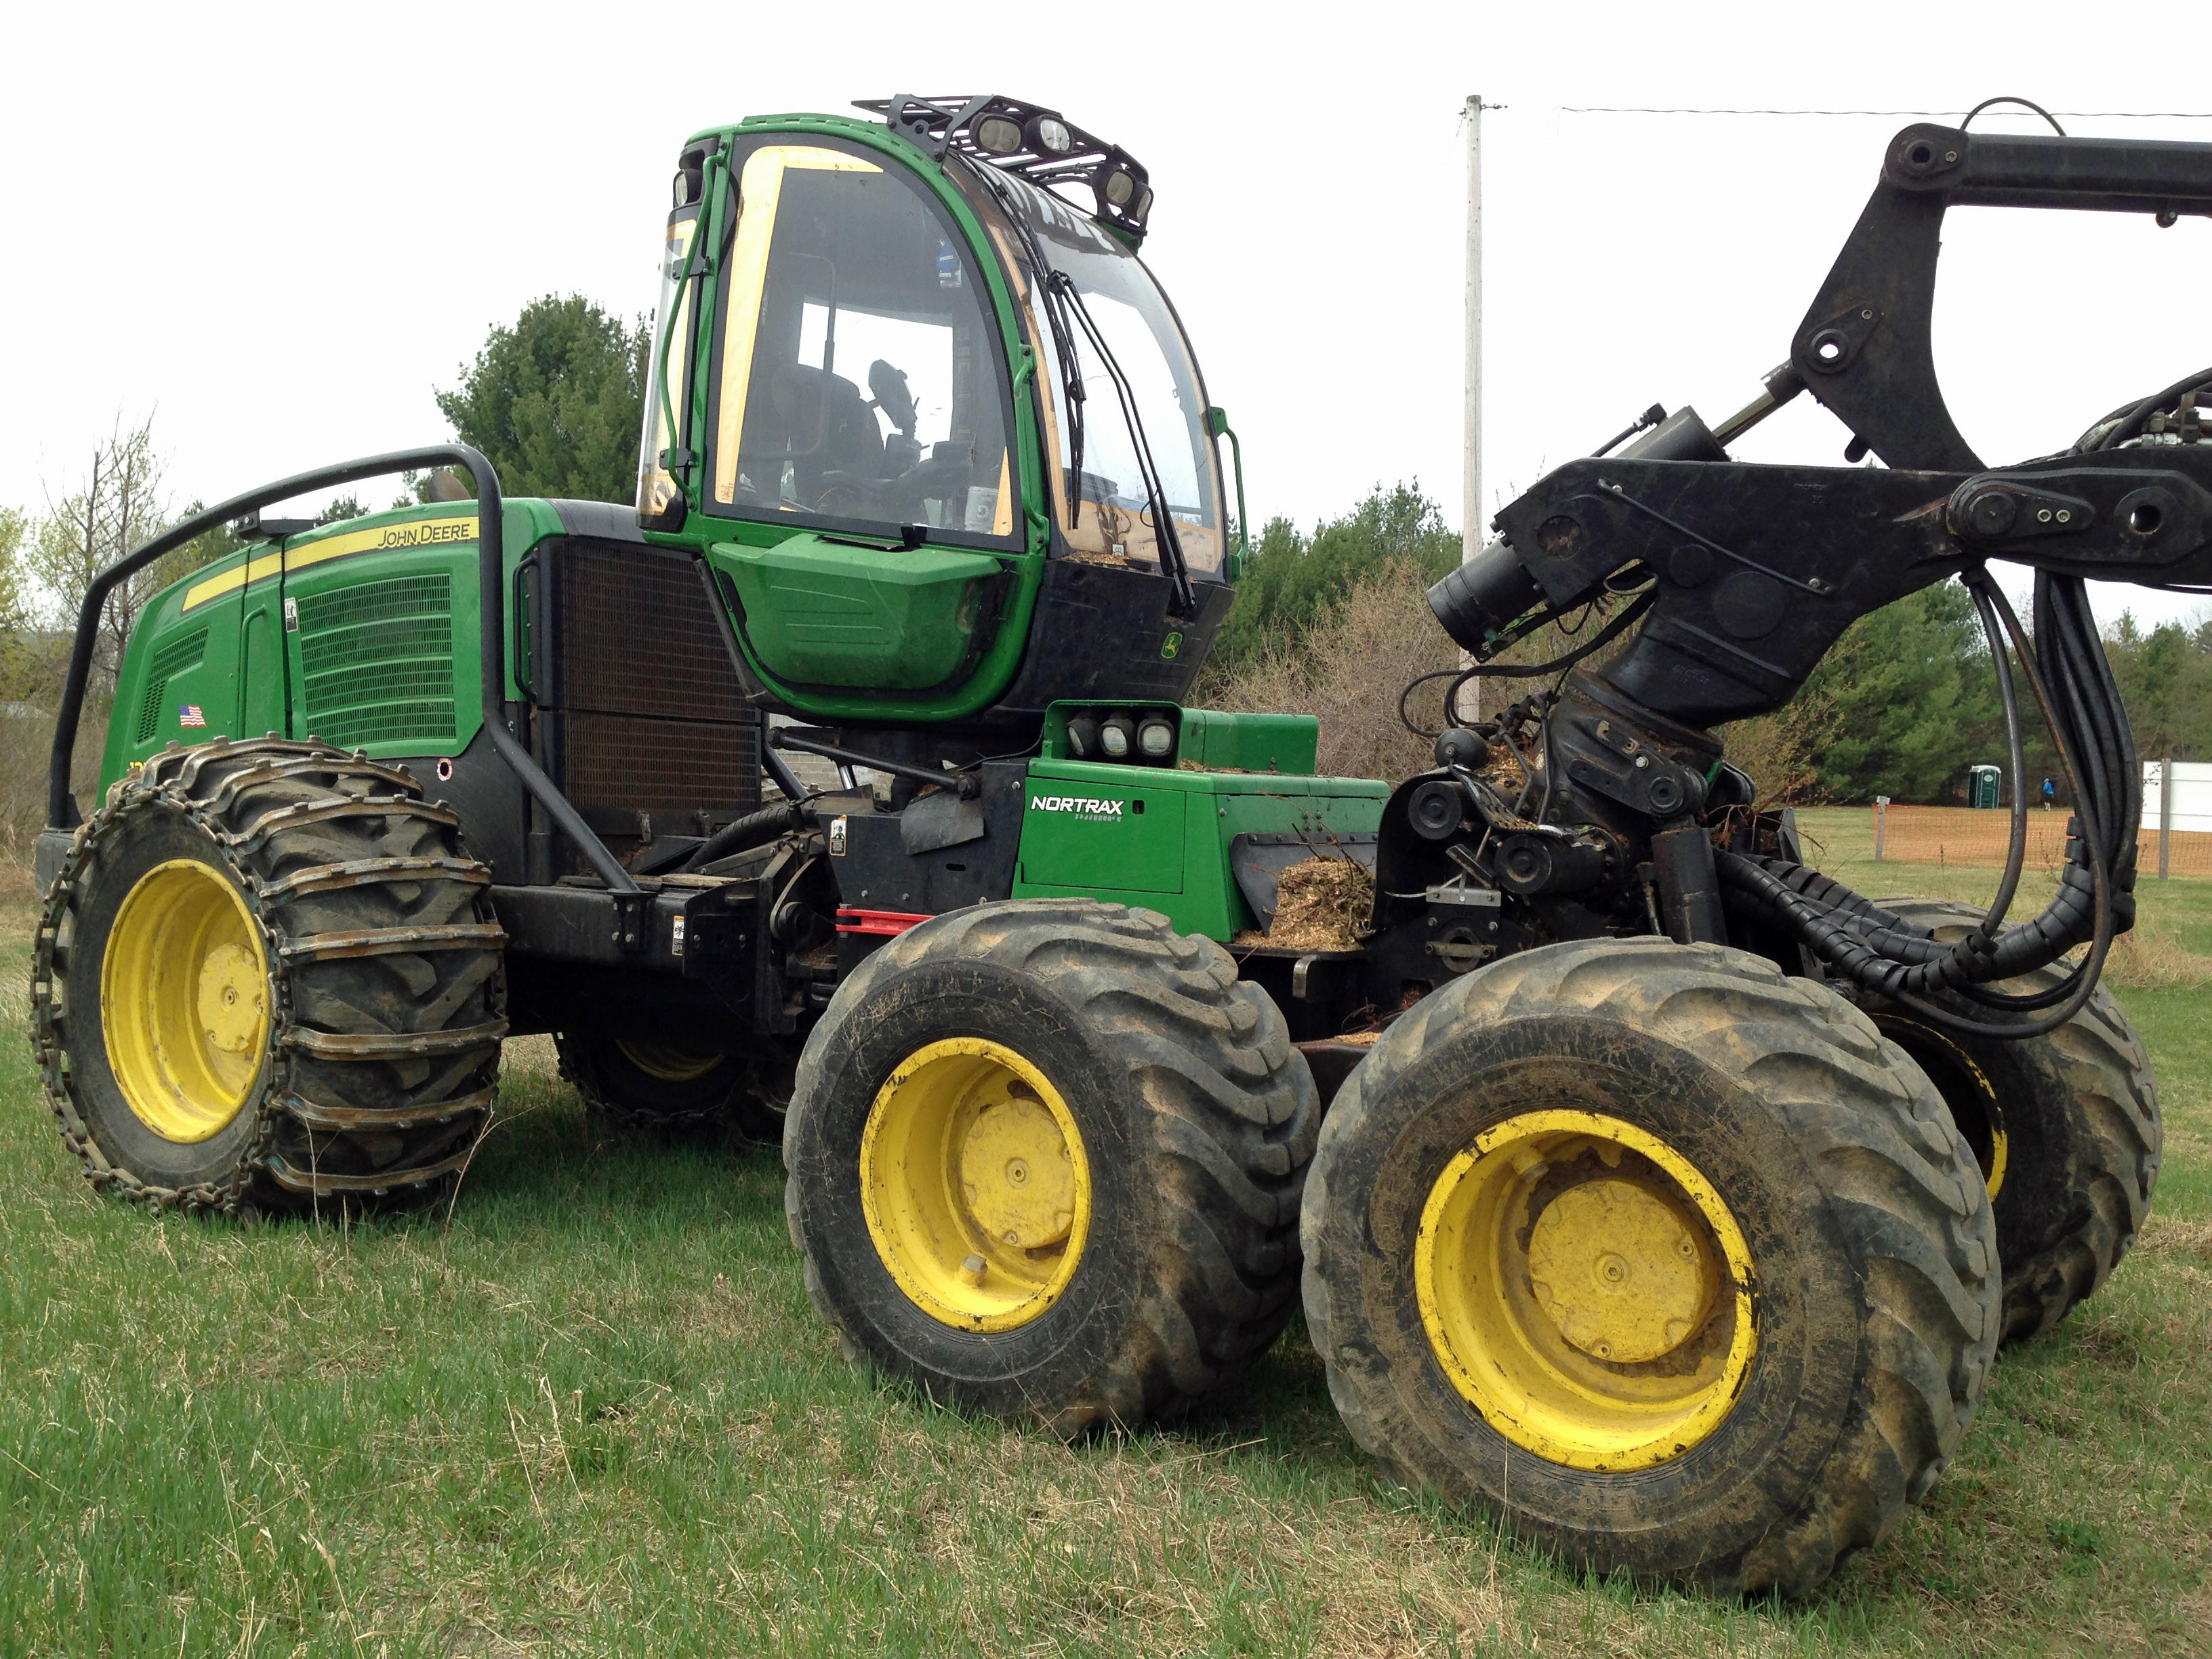 TIMED ONLINE AUCTION LATE MODEL FORESTRY EQUIPMENT Auction